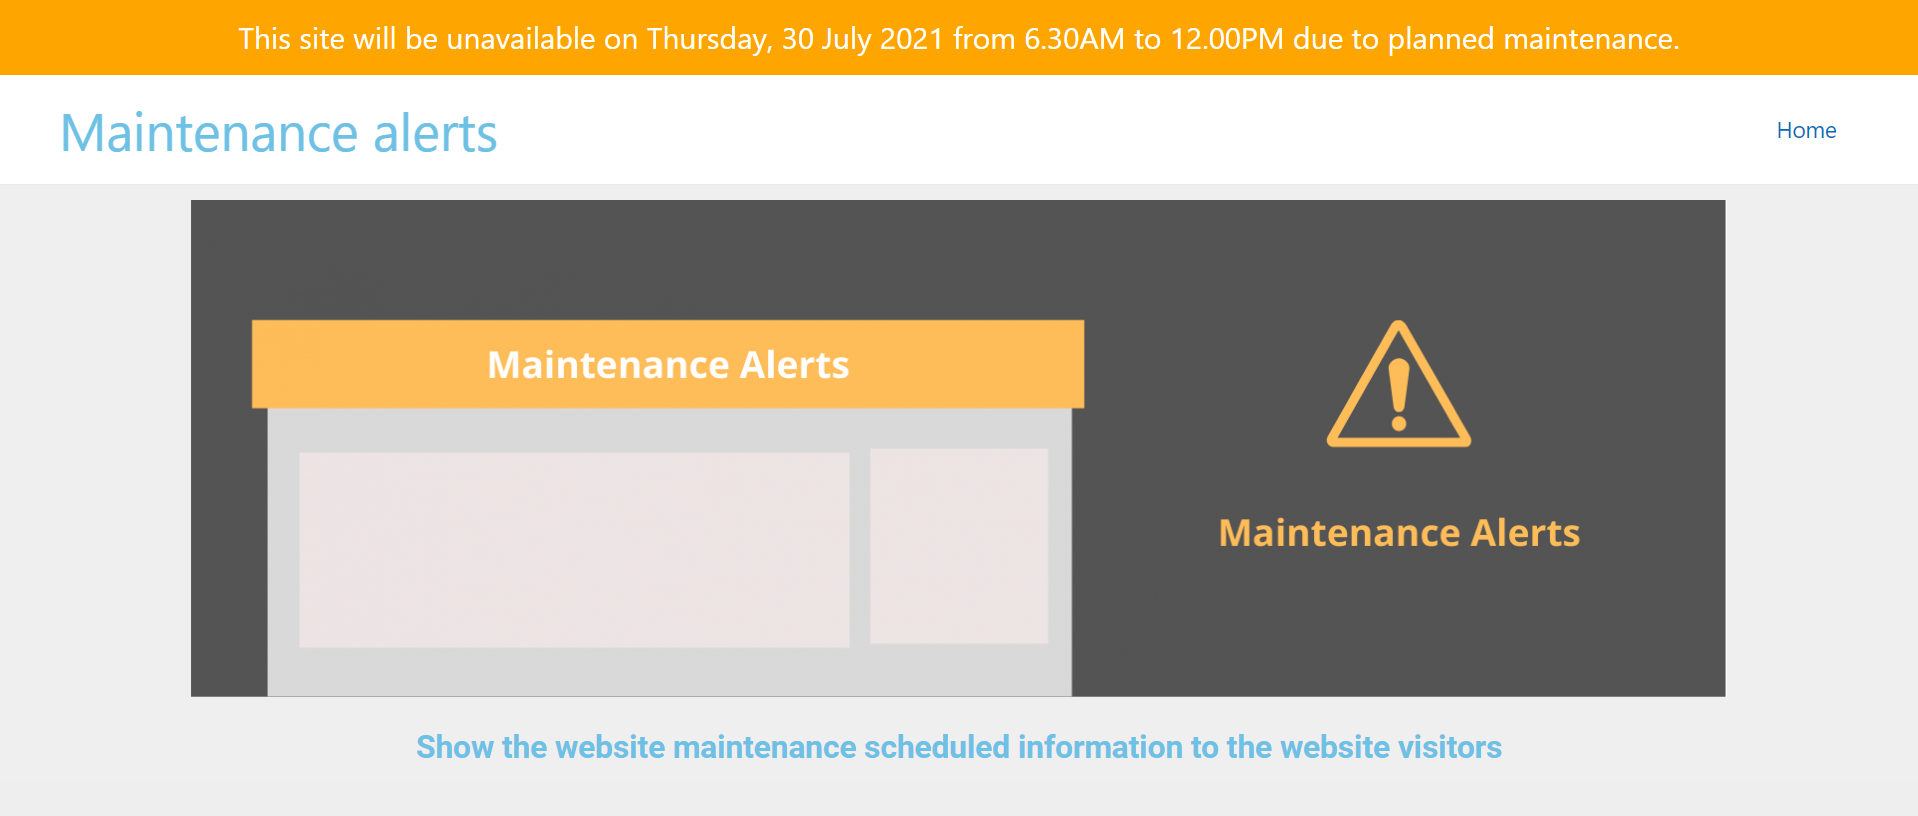 How the alert appears on the website